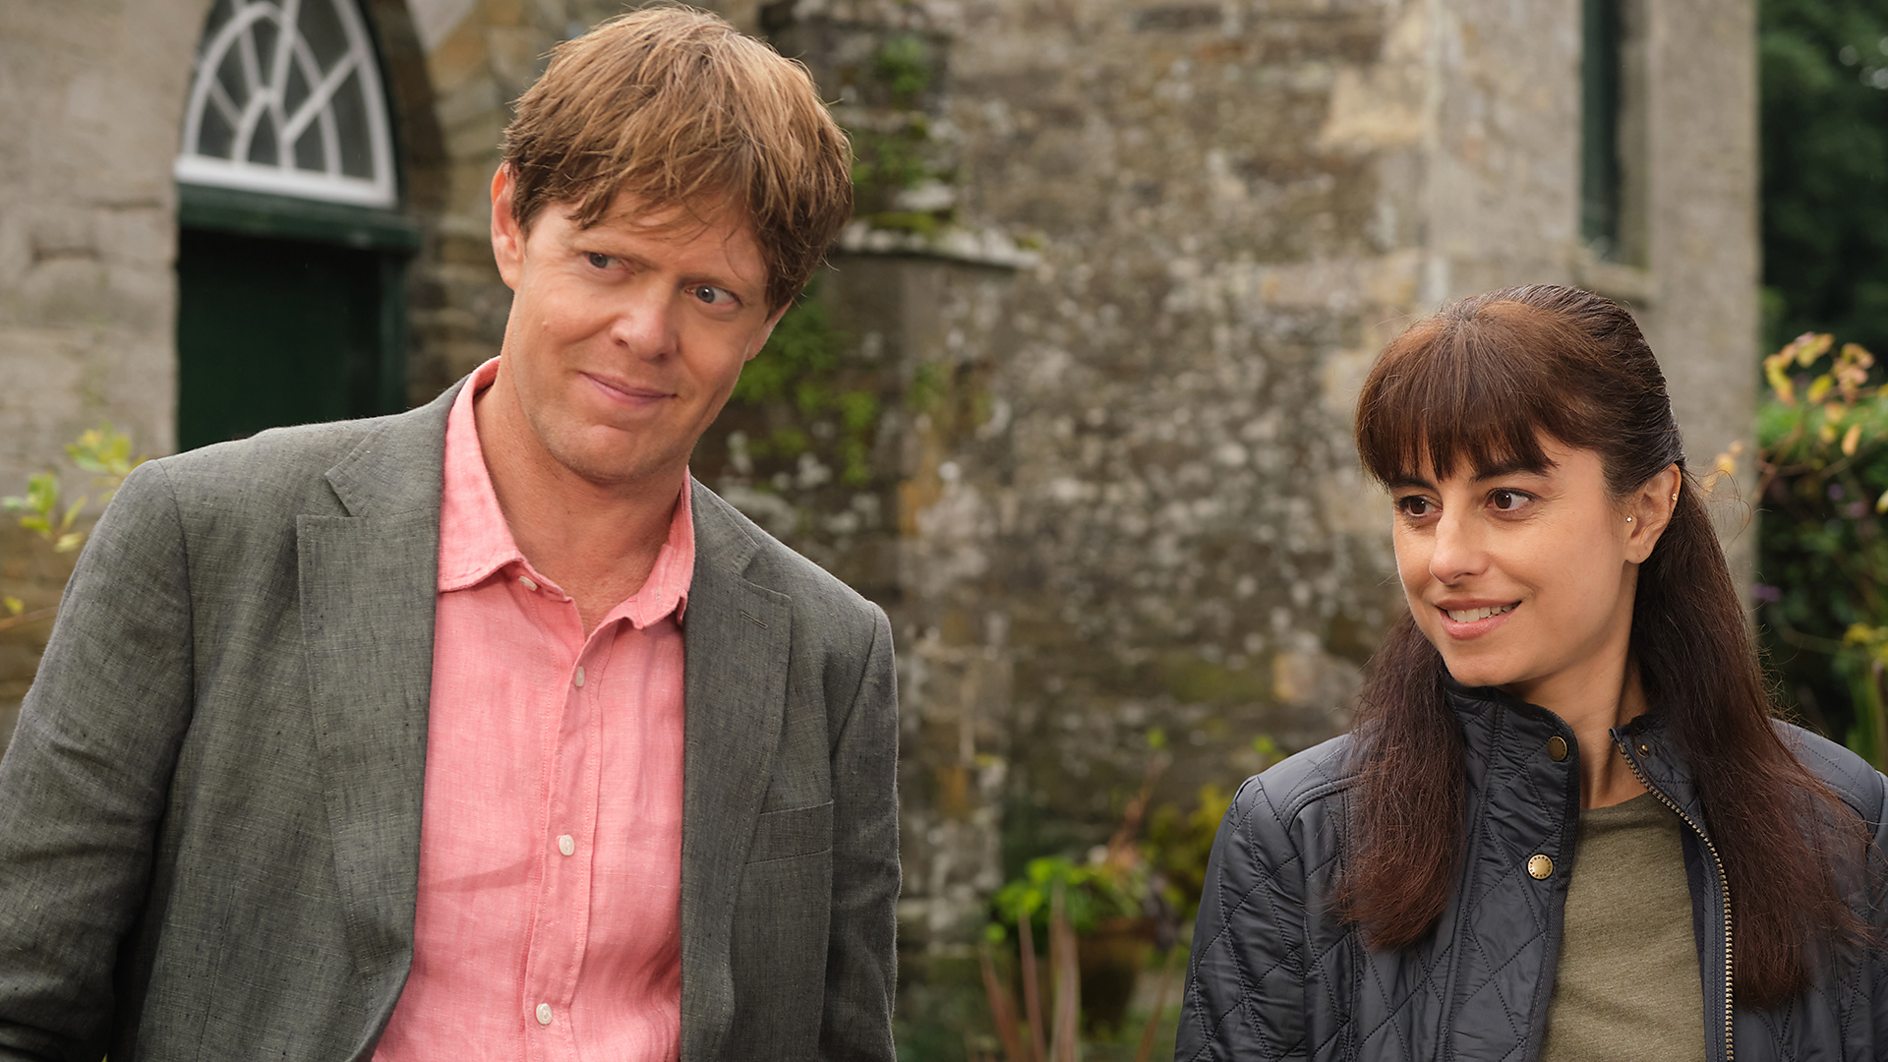 Beyond Paradise Series 2 - Humphrey Goodman (Kris Marshall) and DS Esther Williams (Zahra Ahmadi) stand outside and look at someone off-camera